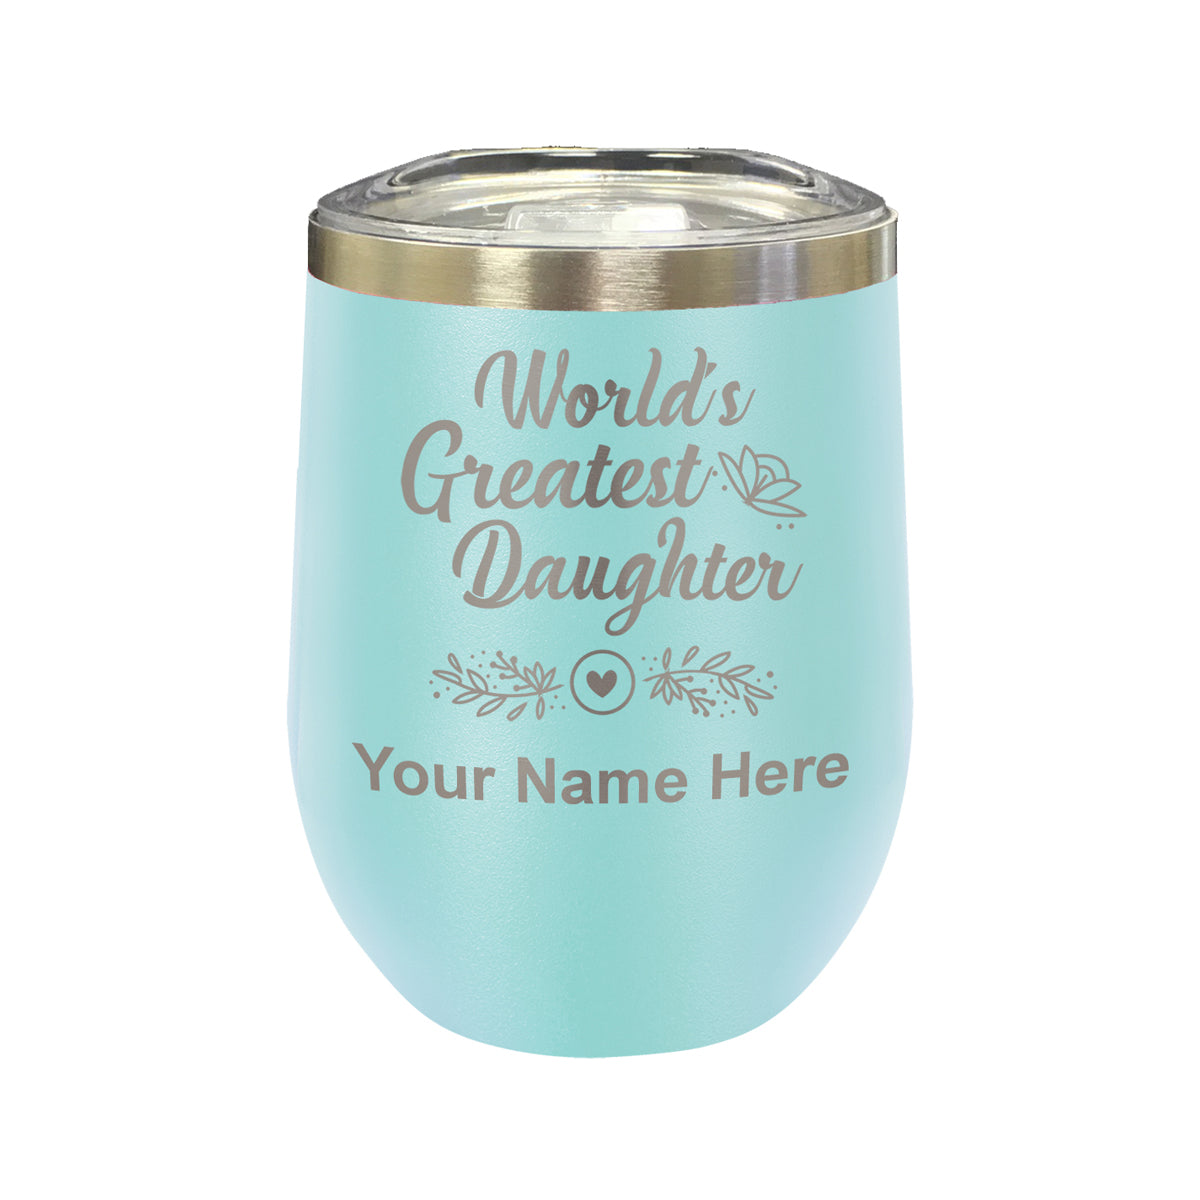 LaserGram Double Wall Stainless Steel Wine Glass, World's Greatest Daughter, Personalized Engraving Included